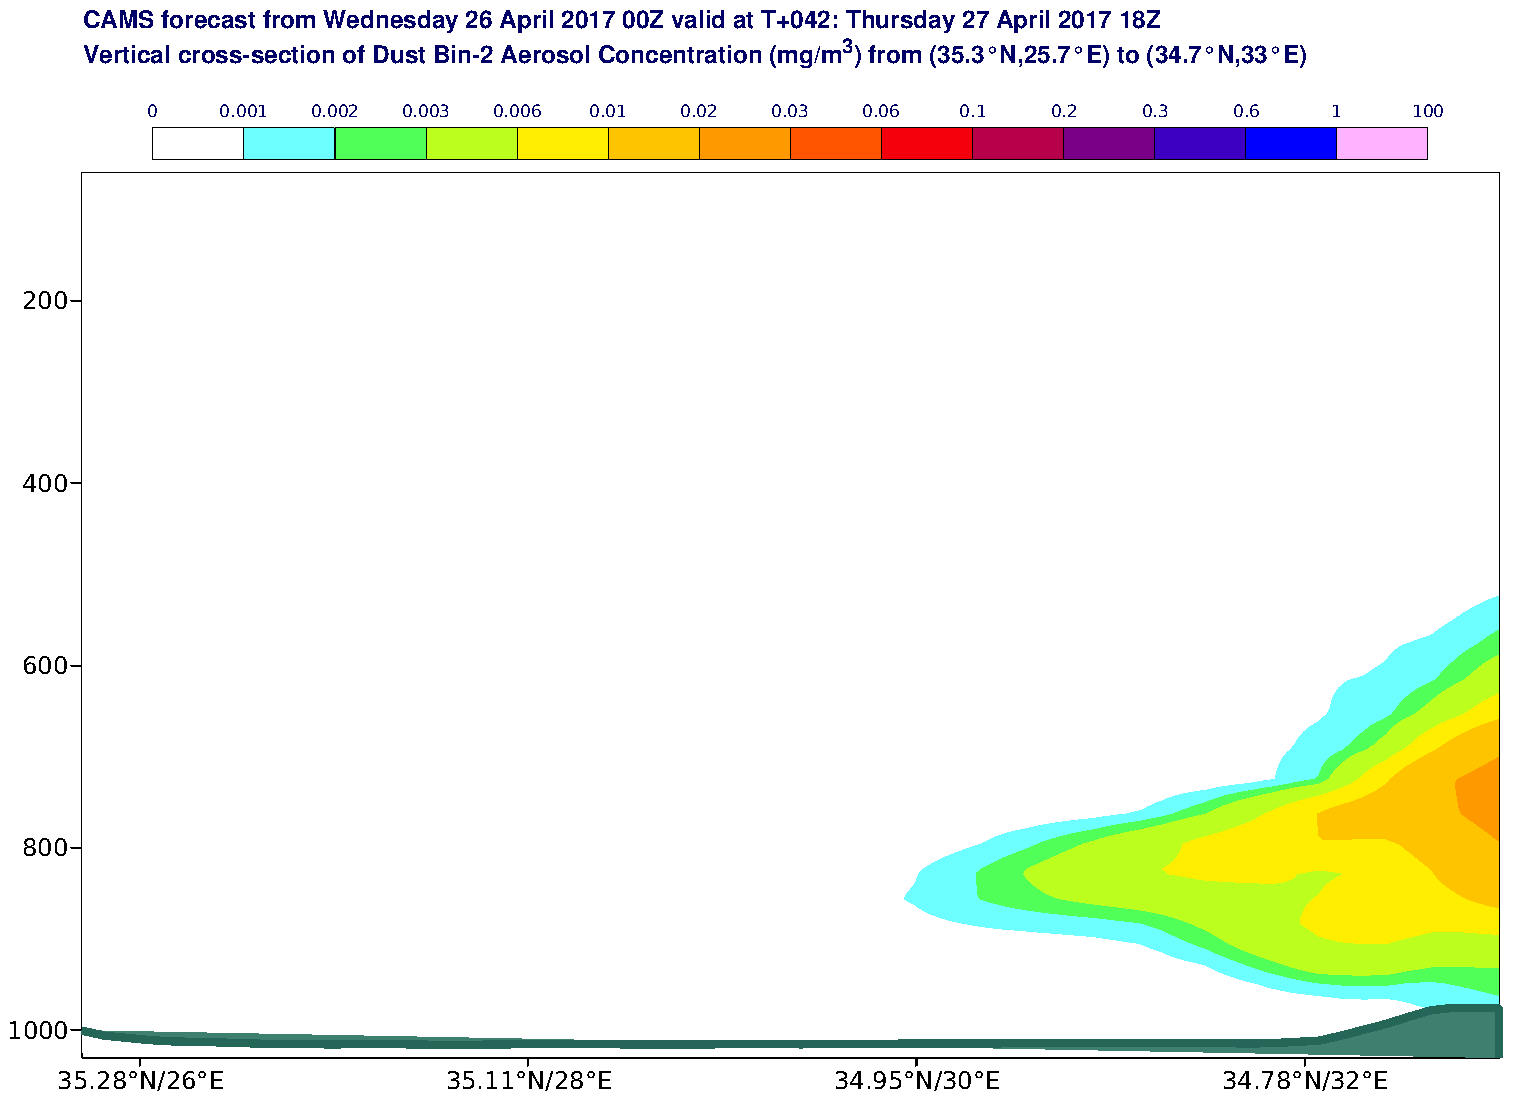 Vertical cross-section of Dust Bin-2 Aerosol Concentration (mg/m3) valid at T42 - 2017-04-27 18:00